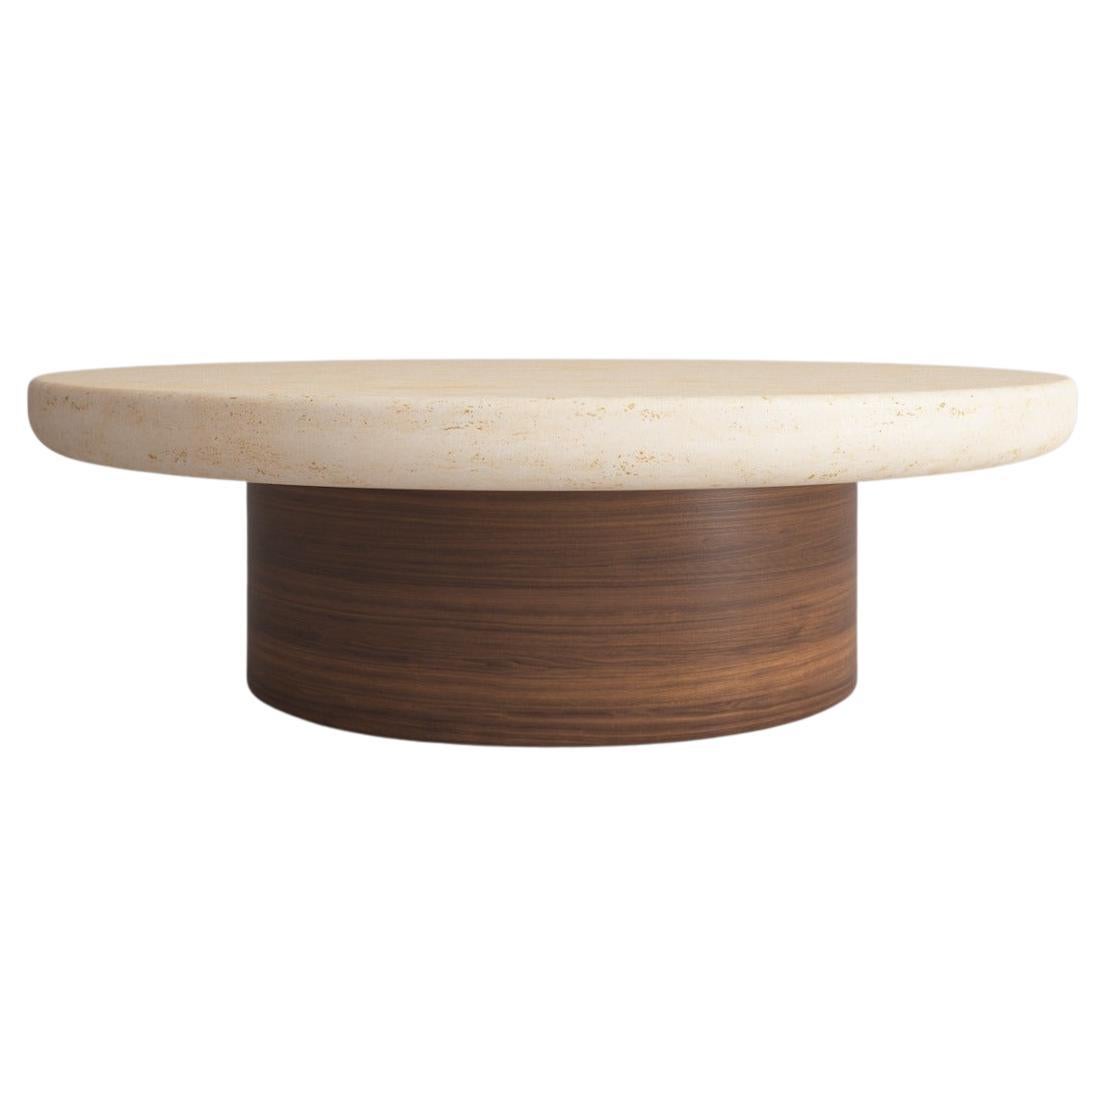 Lessa, 21st Century European Side Table Designed by Studio Rig Travertino Wood For Sale